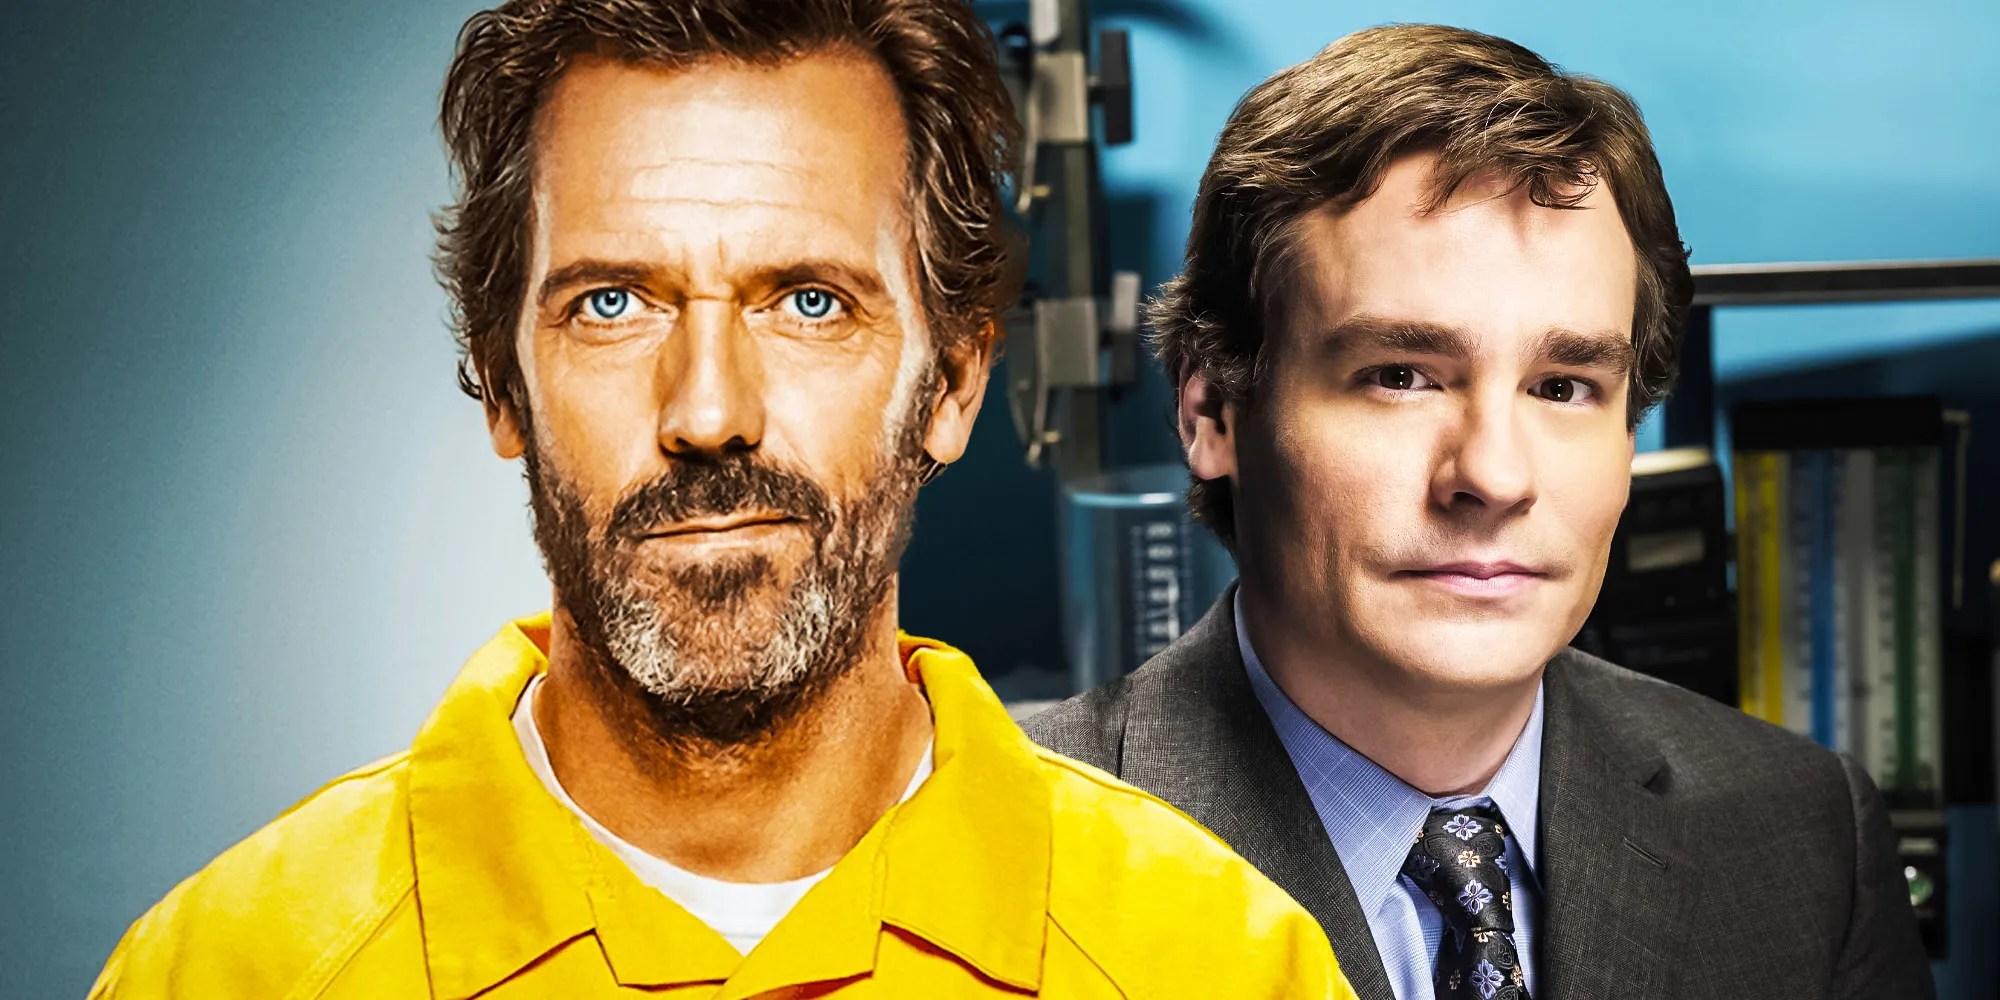 A blended image features House and Wilson in the TV series House MD